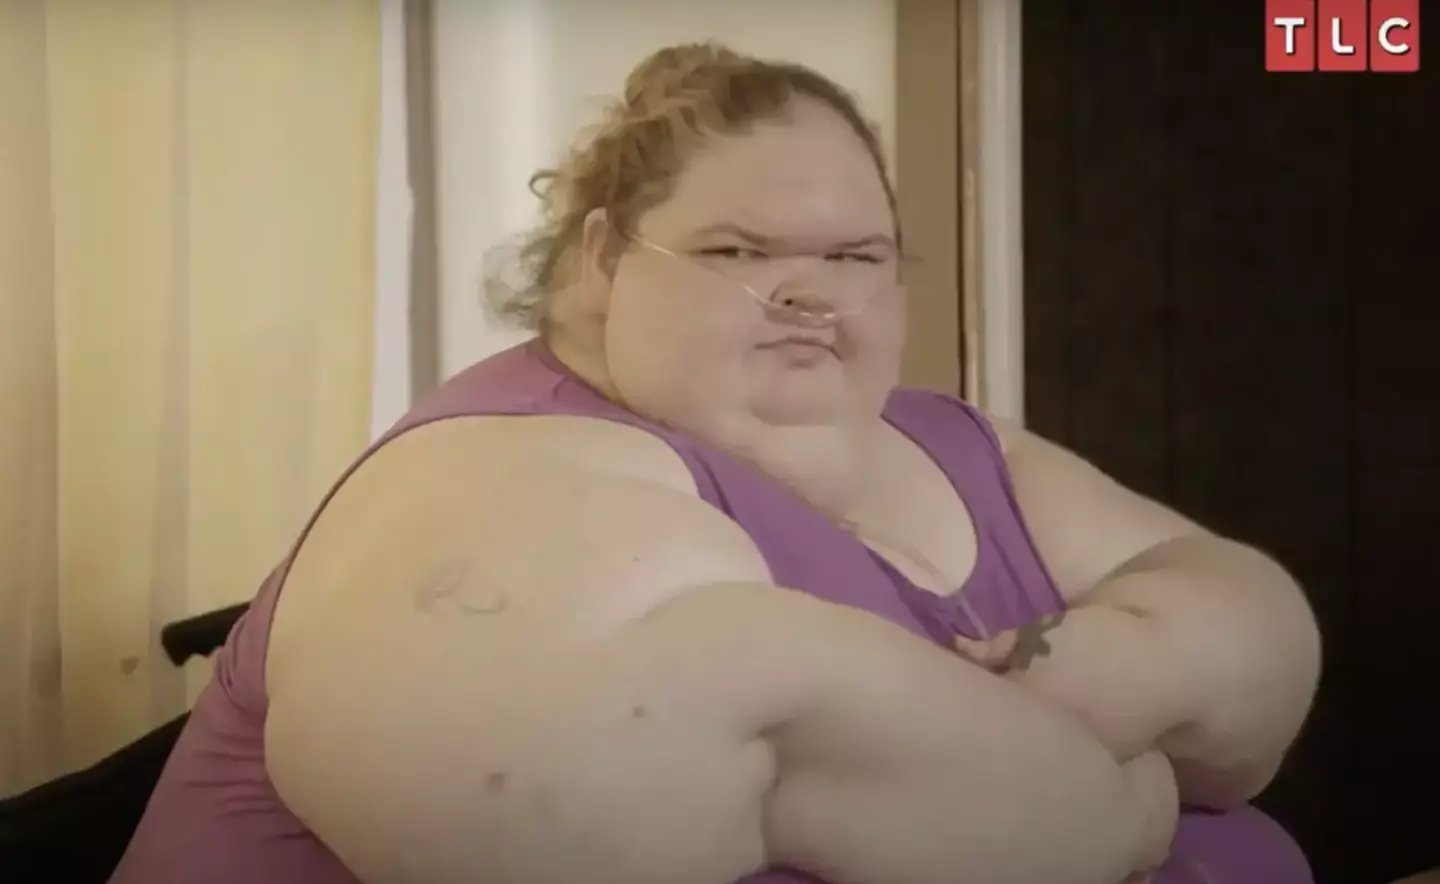 Concerns are growing over The 1000Lb Sisters star Tammy Slaton.